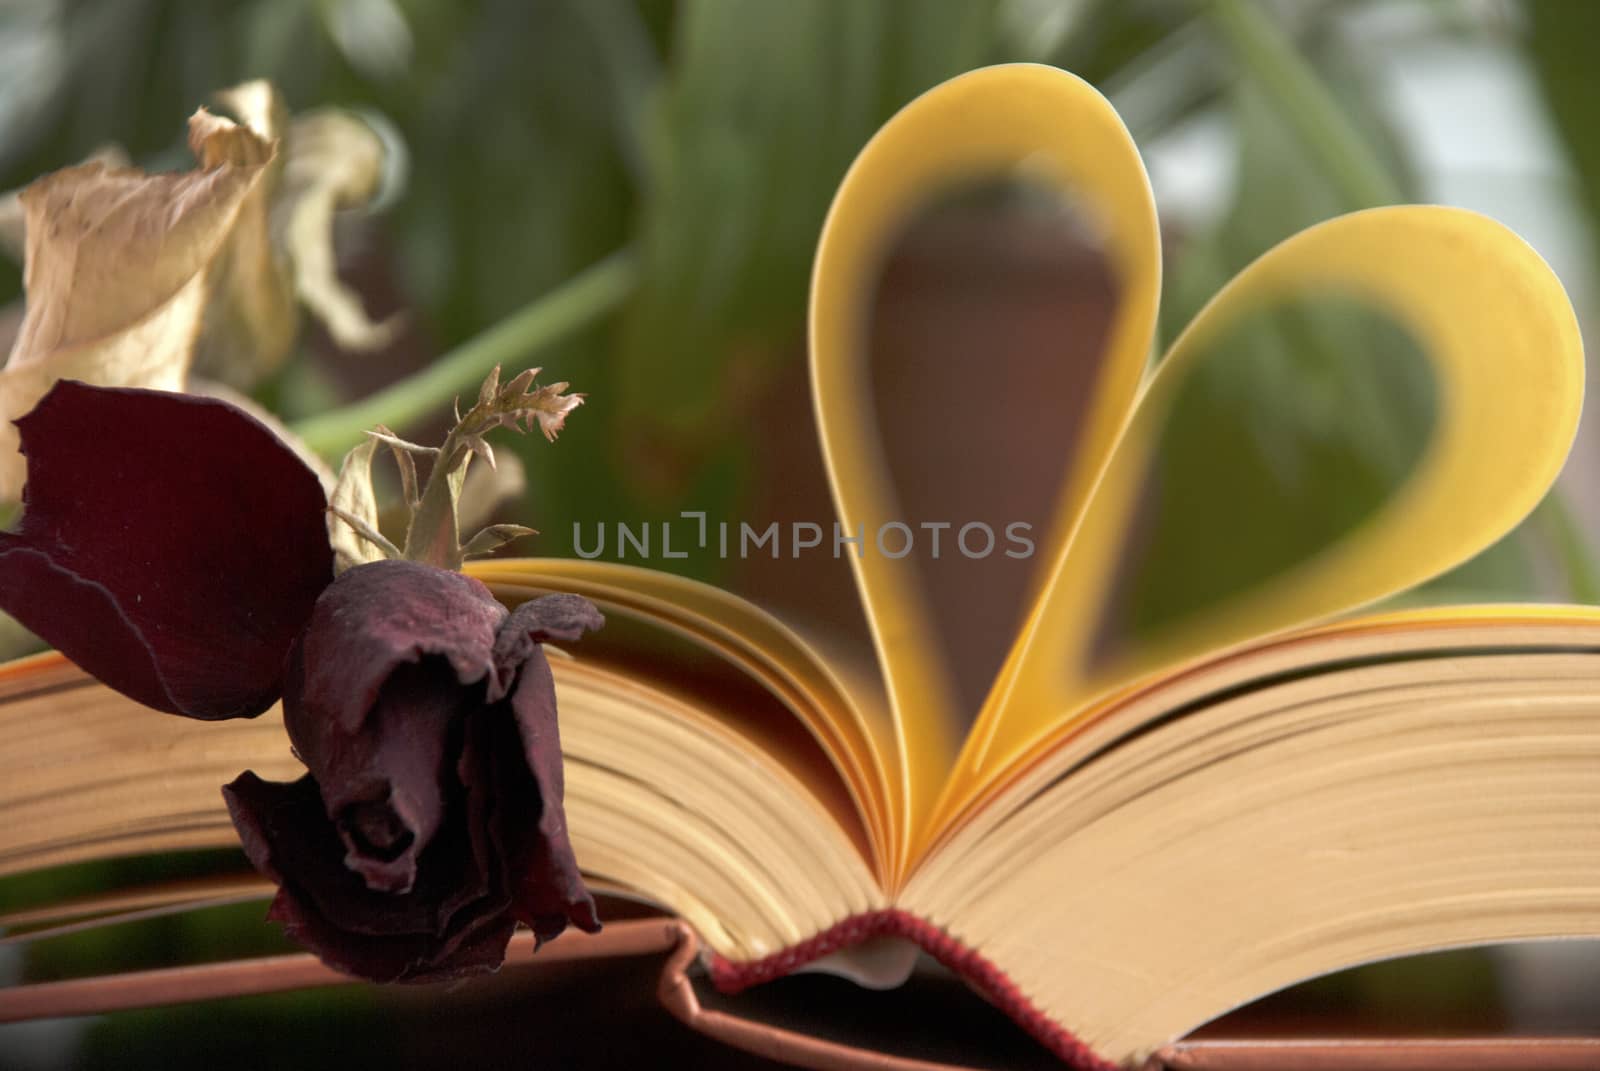 Love and Books and Rose by MelekKalyoncu